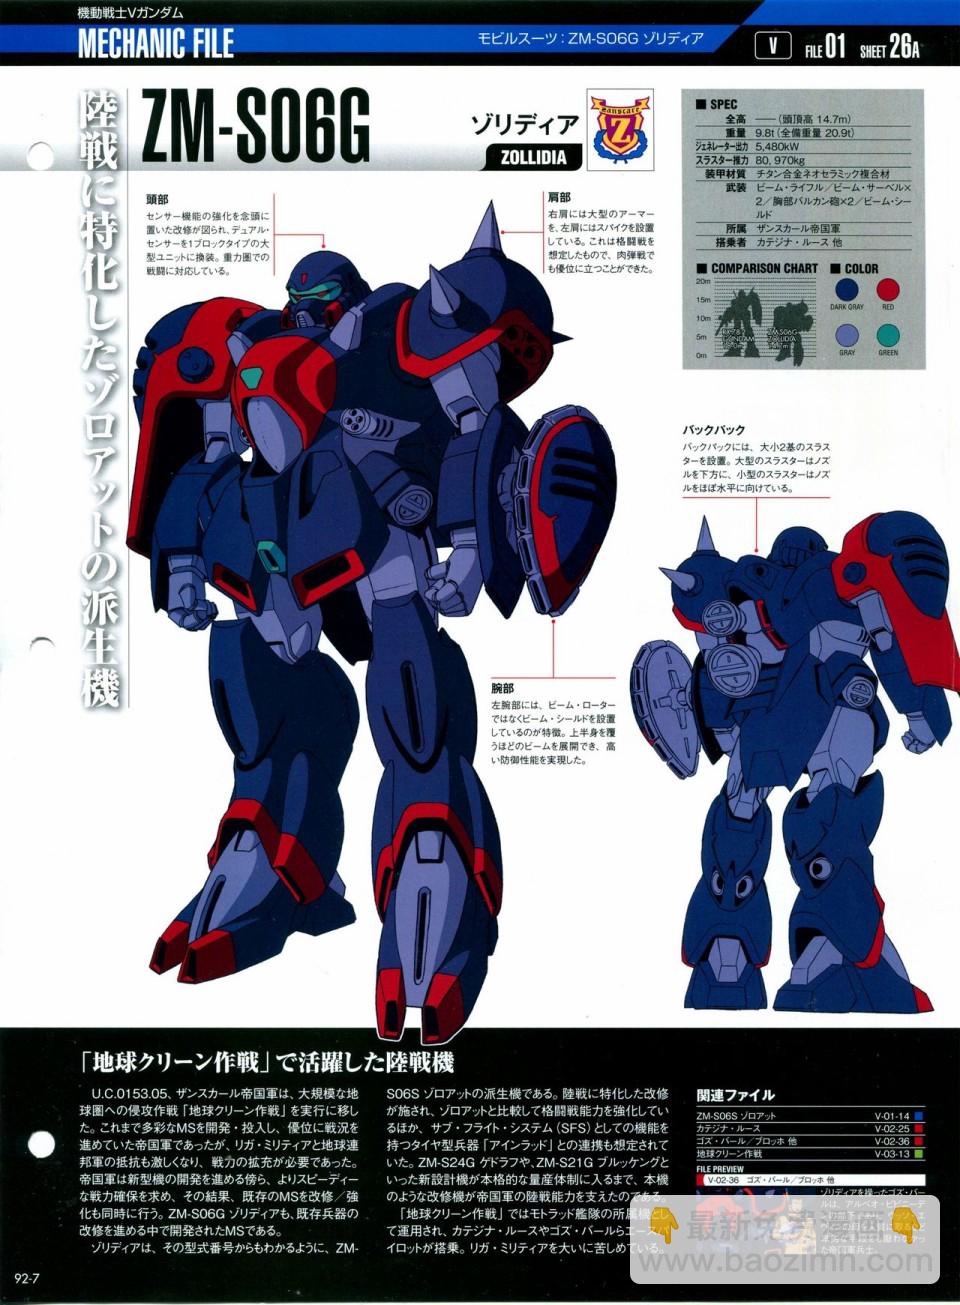 The Official Gundam Perfect File  - 第91-100話(1/7) - 3